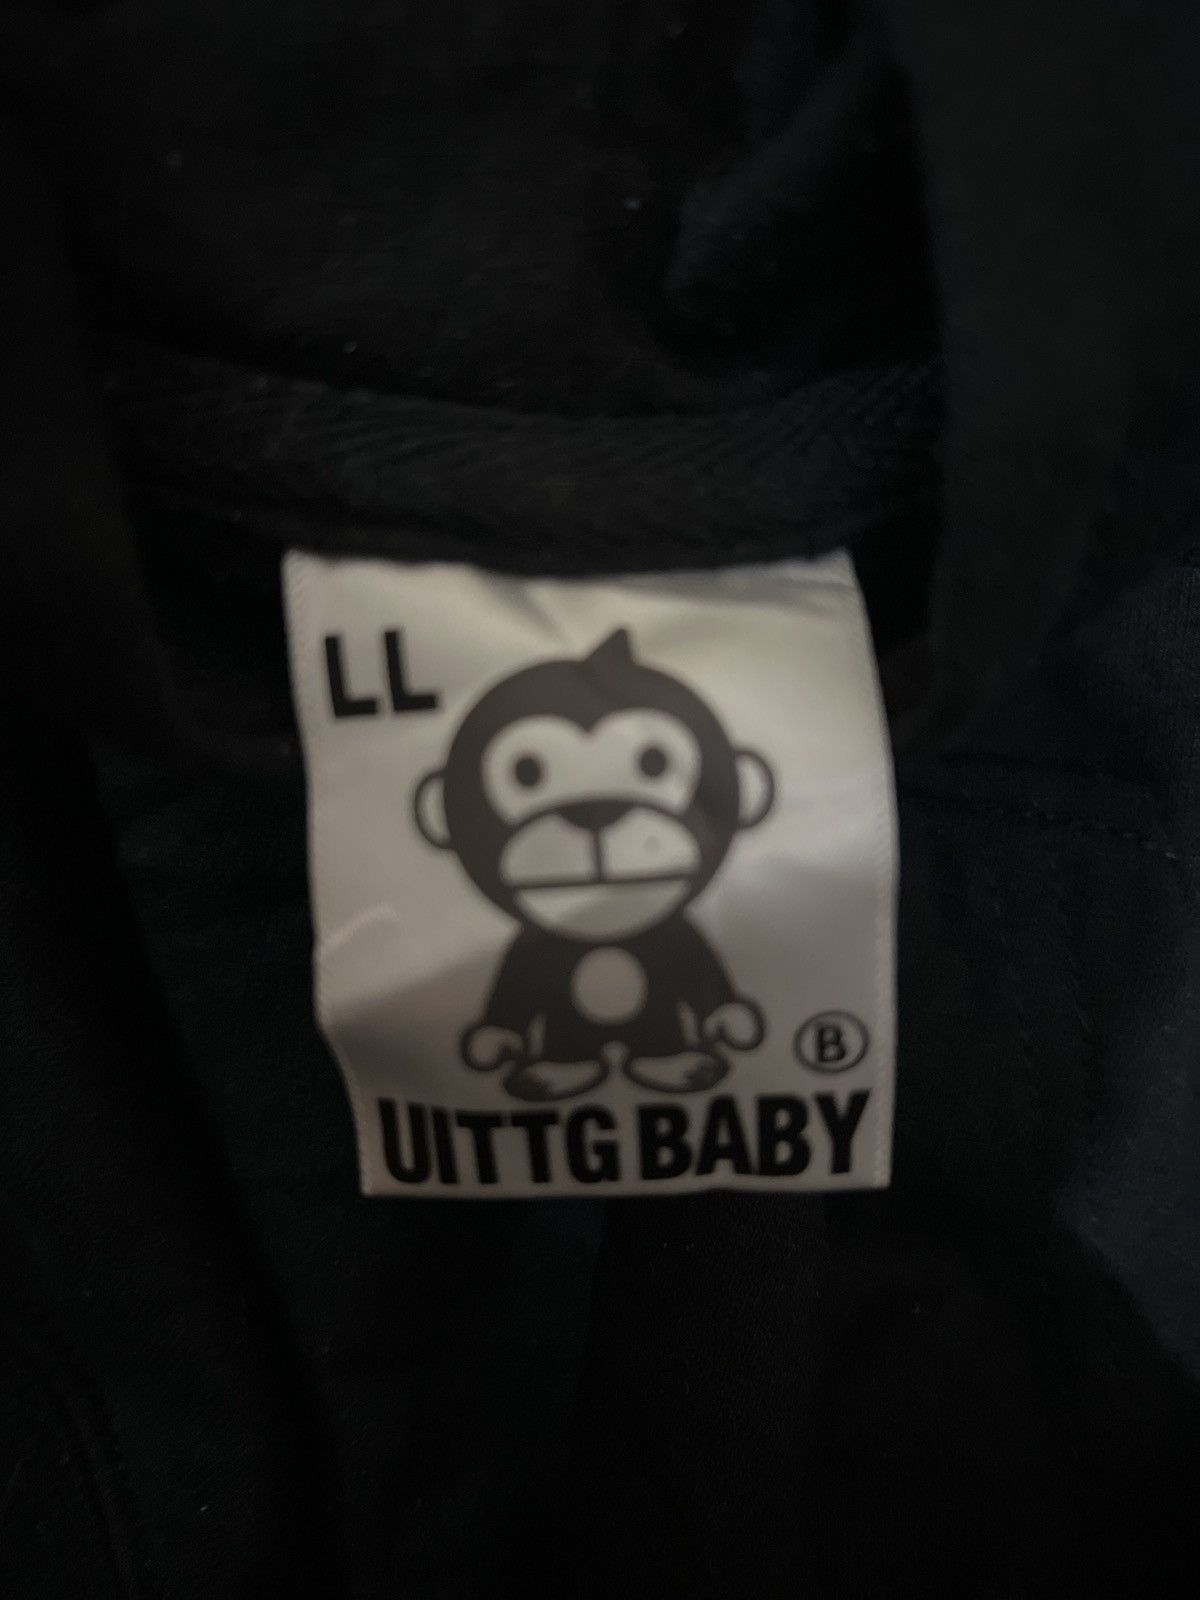 Japanese Brand HOODIE BY UITTG BABY MULTICOLOUR Size US L / EU 52-54 / 3 - 4 Thumbnail